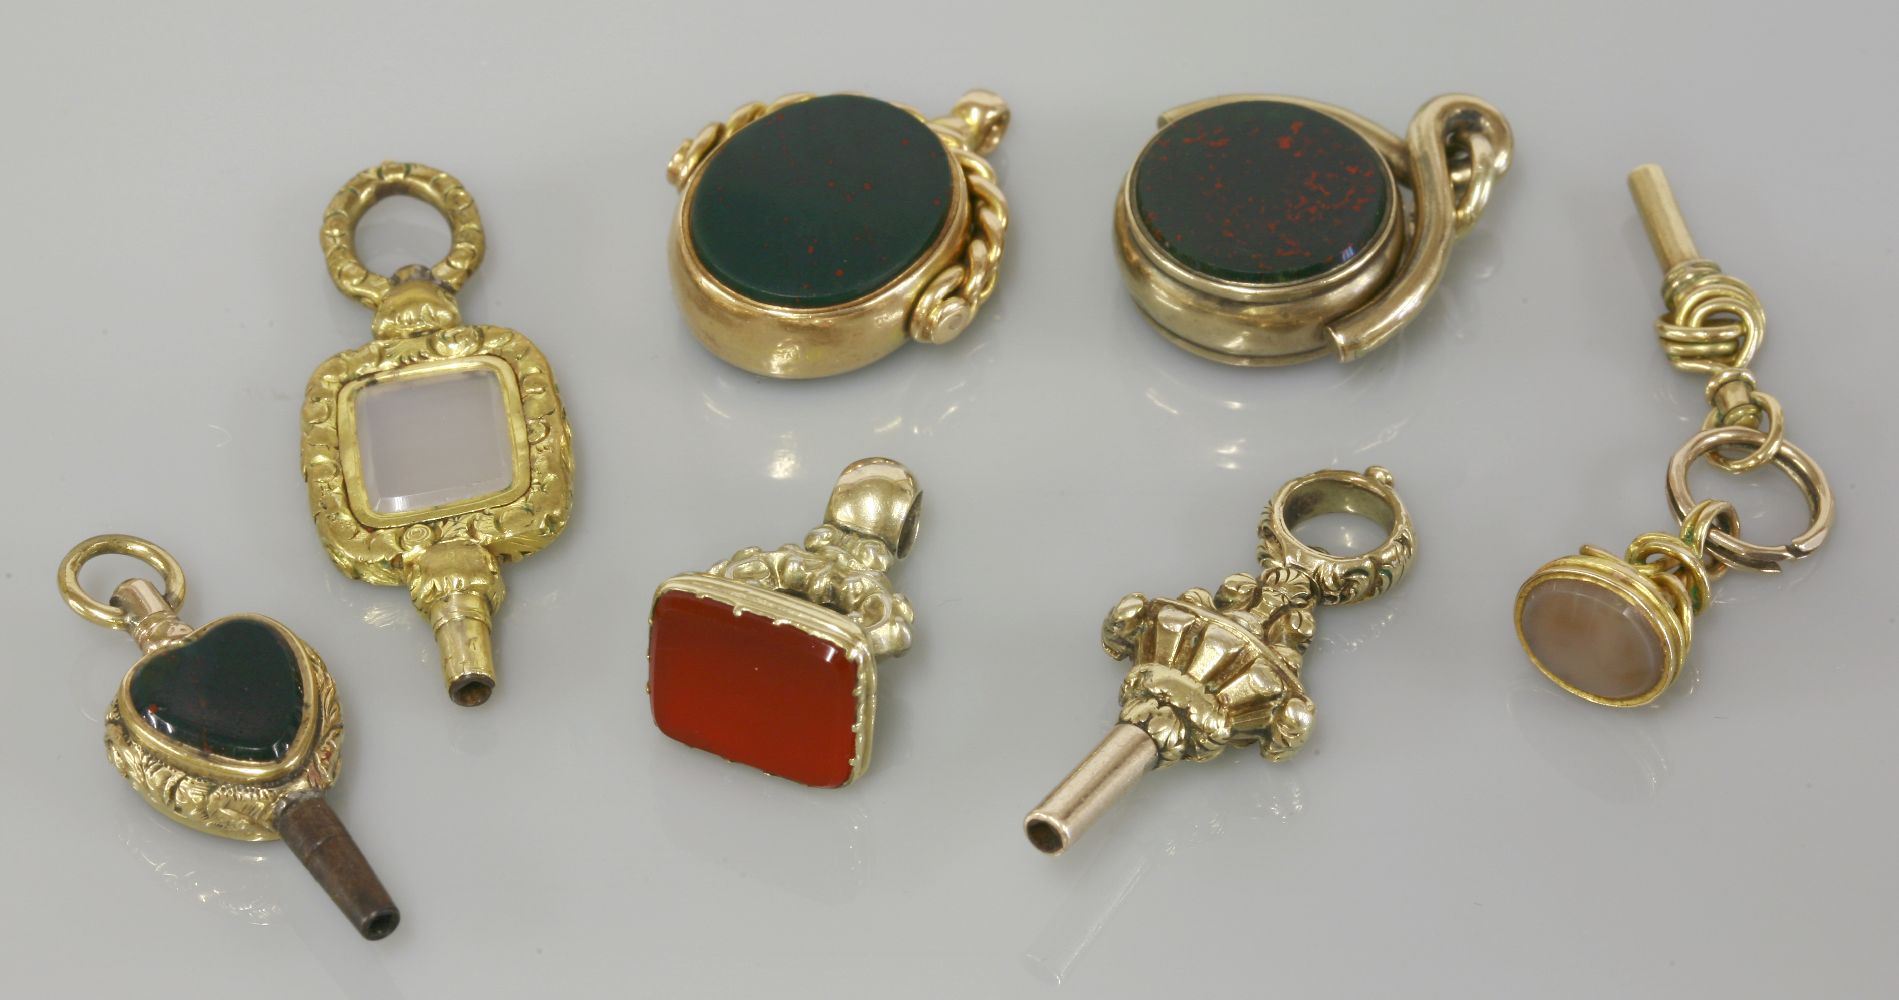 A 15ct gold bloodstone and sardonyx swivel fob, hallmark almost obliterated, an Edwardian gold